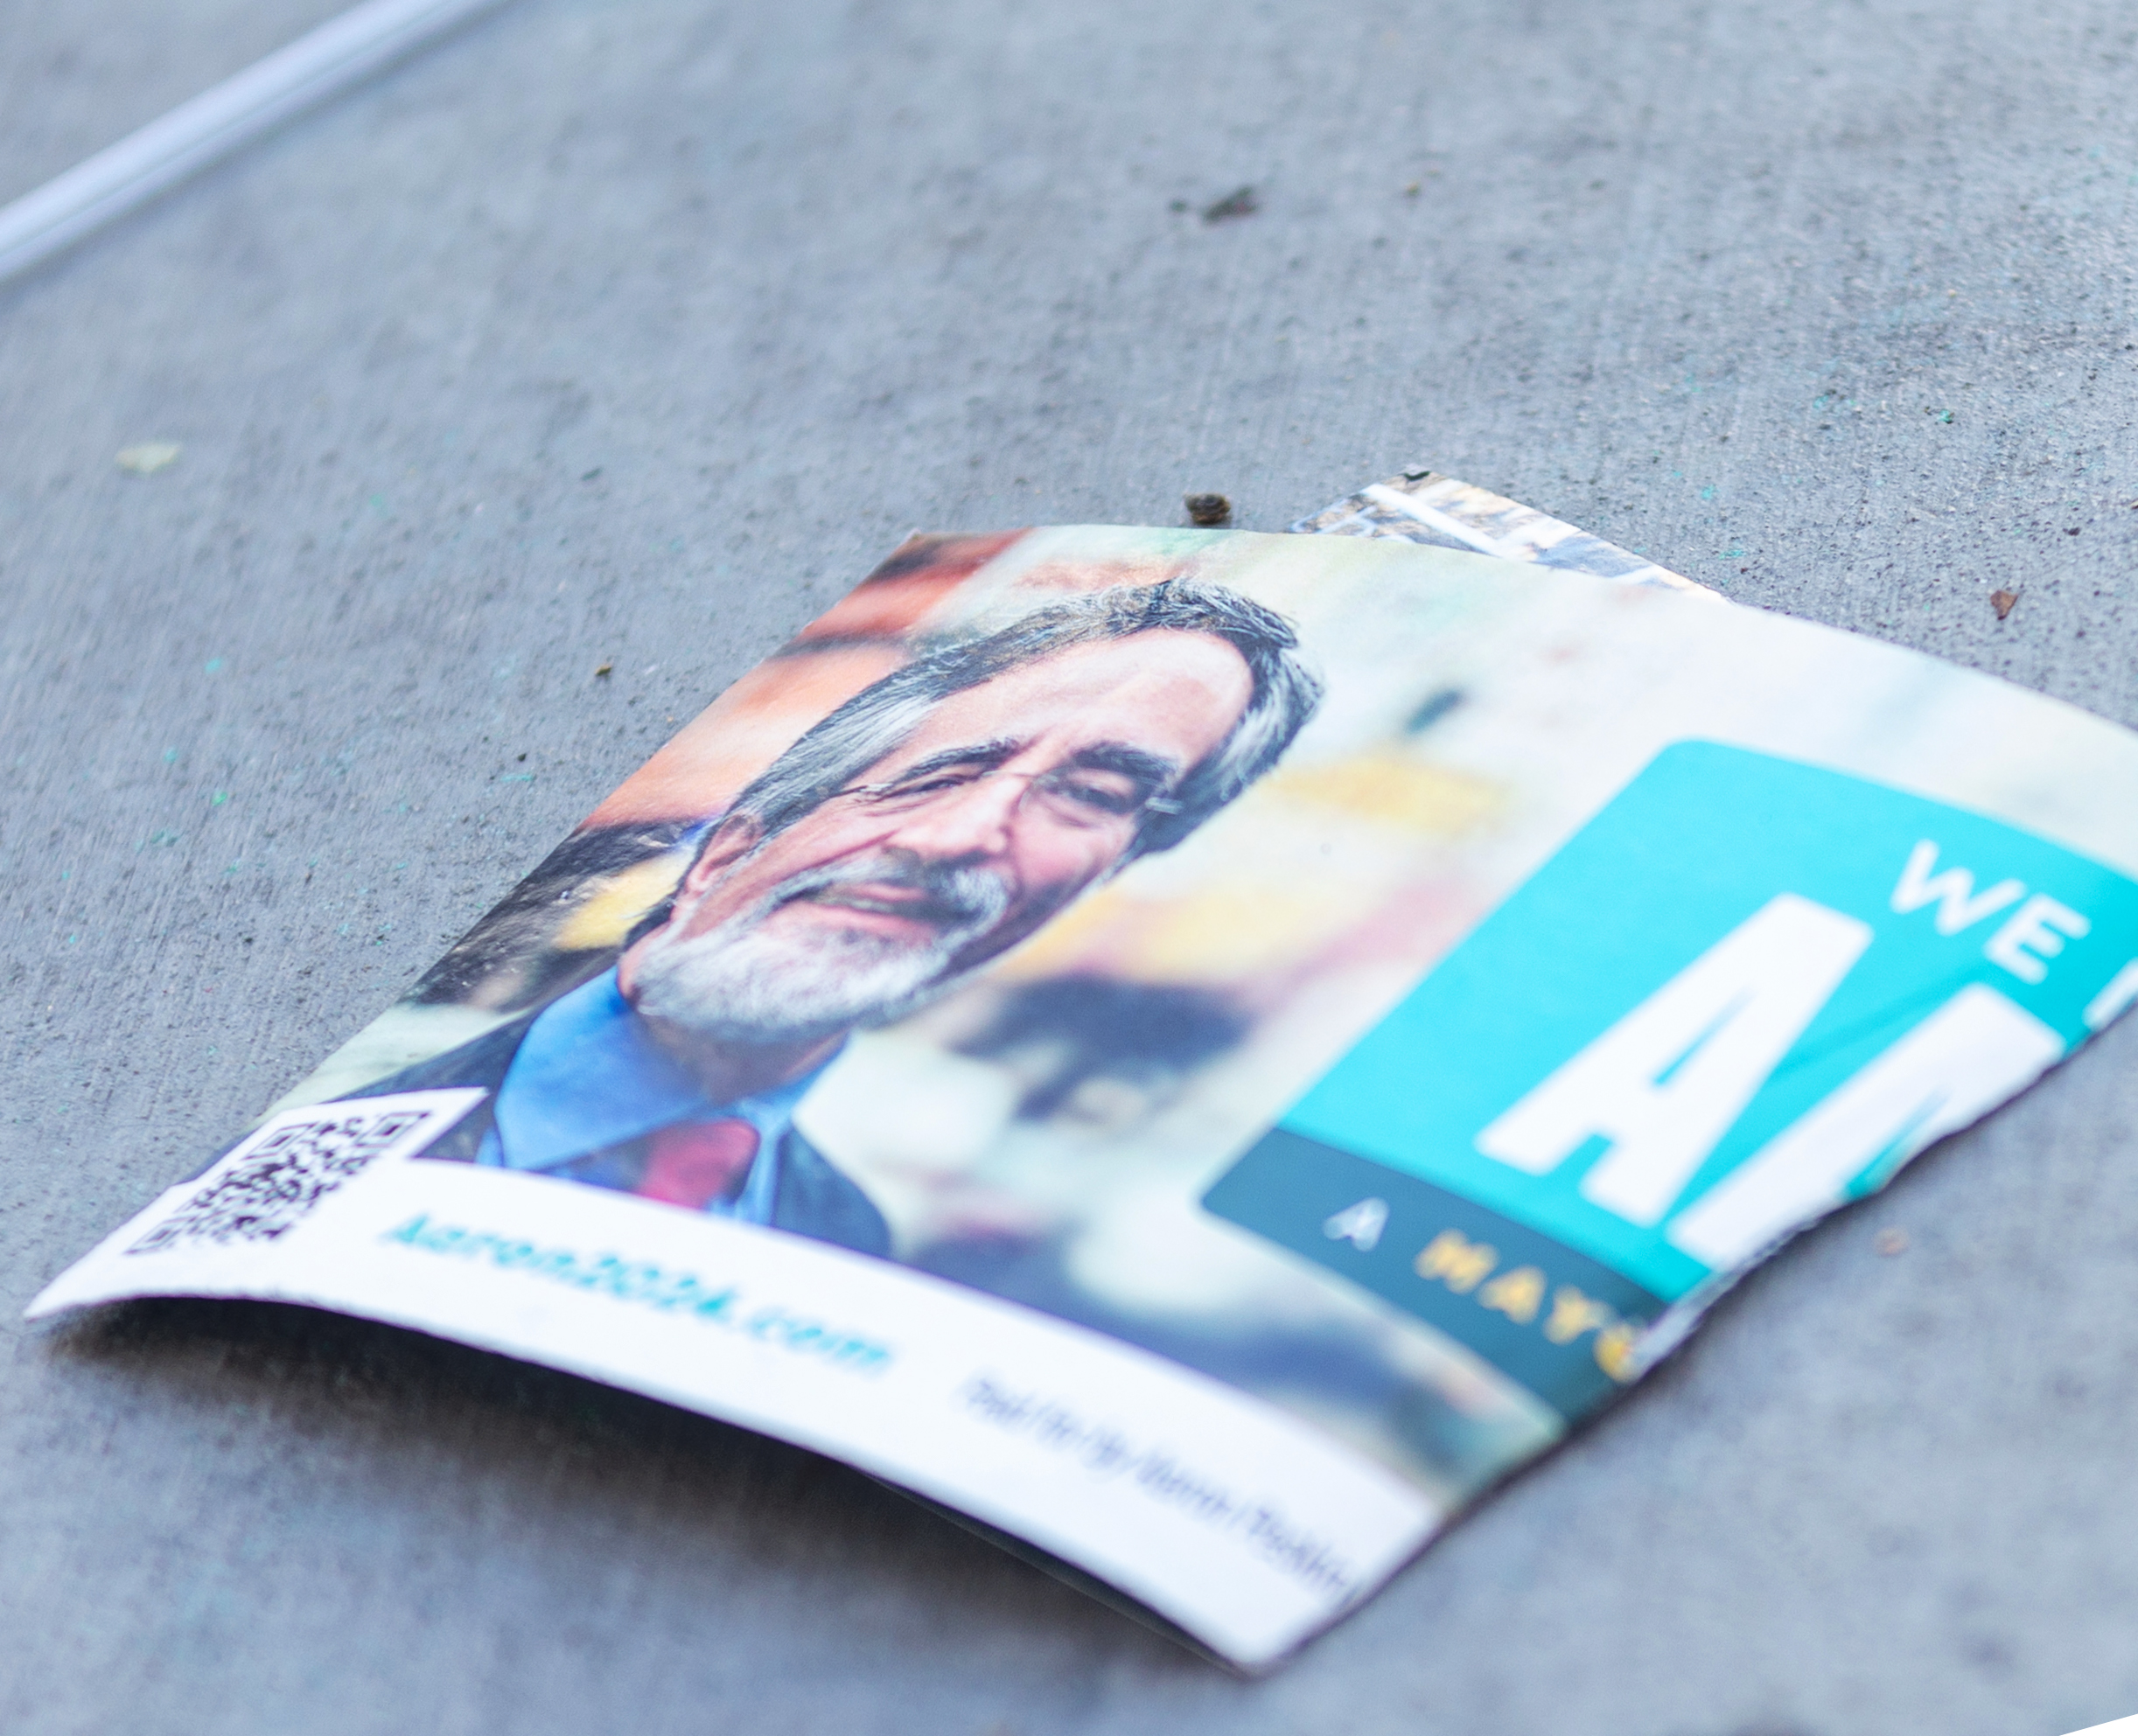 A torn political flyer on the ground shows Supervisor Aaron Peskin with a beard and suit. It includes a QR code, a website link, and partially visible text likely promoting a campaign.